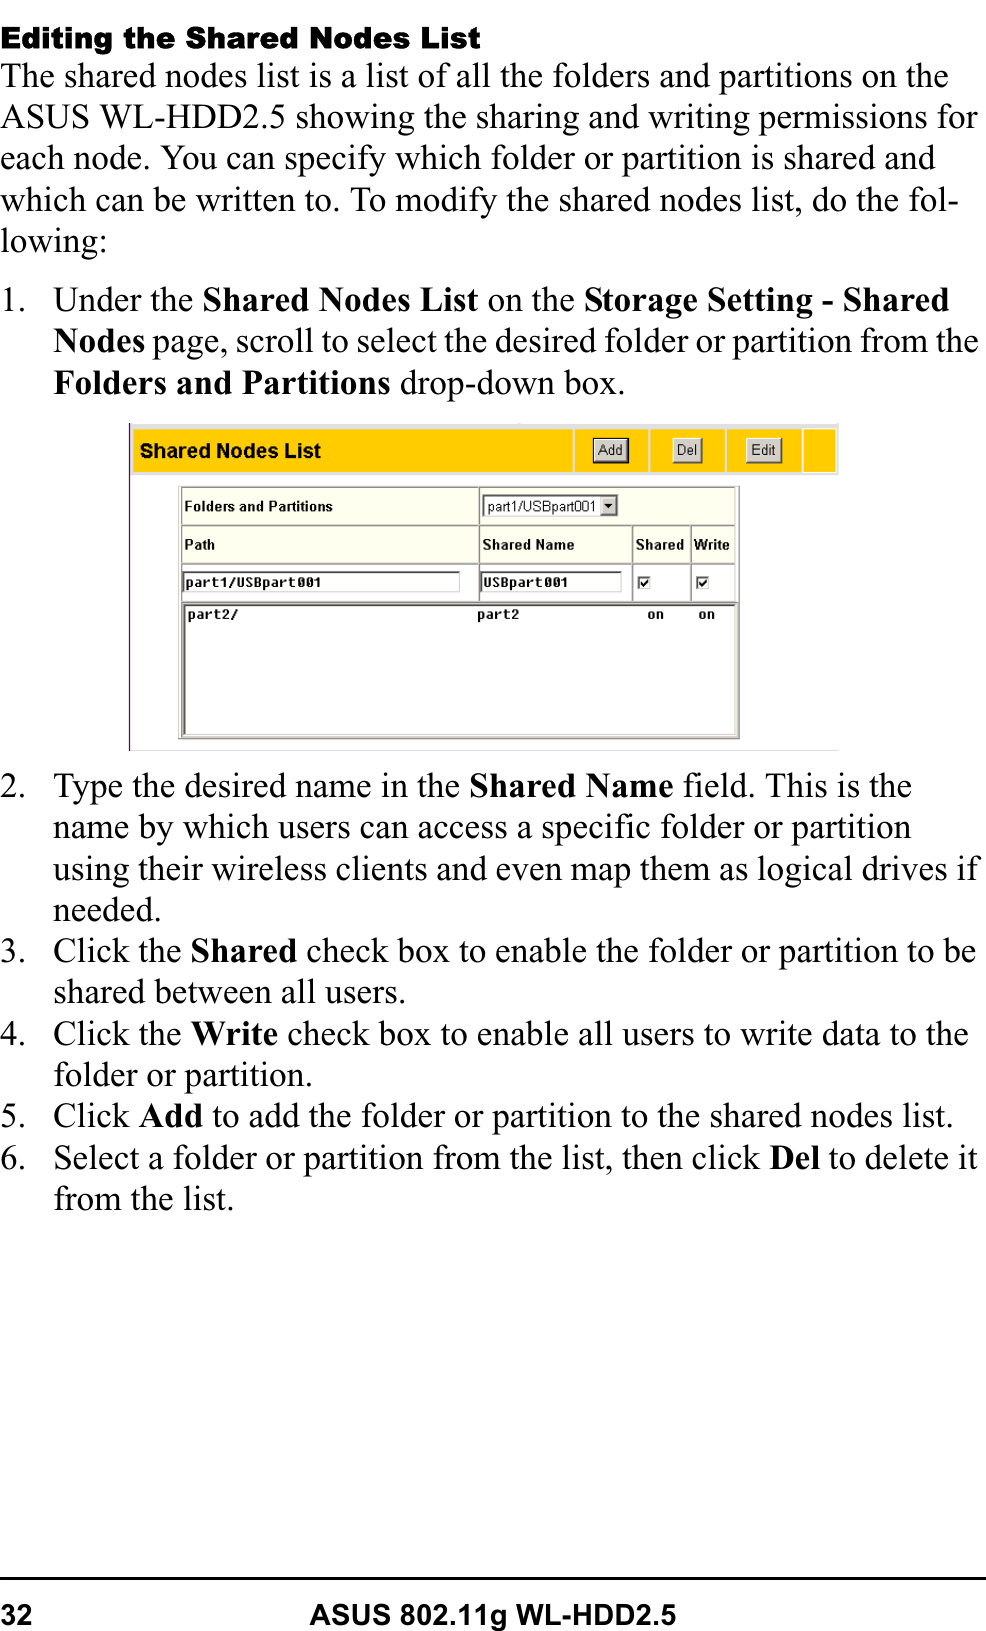 32 ASUS 802.11g WL-HDD2.5Editing the Shared Nodes ListThe shared nodes list is a list of all the folders and partitions on the ASUS WL-HDD2.5 showing the sharing and writing permissions for each node. You can specify which folder or partition is shared and which can be written to. To modify the shared nodes list, do the fol-lowing:1. Under the Shared Nodes List on the Storage Setting - Shared Nodes page, scroll to select the desired folder or partition from the Folders and Partitions drop-down box. 2. Type the desired name in the Shared Name field. This is the name by which users can access a specific folder or partition using their wireless clients and even map them as logical drives if needed.3. Click the Shared check box to enable the folder or partition to be shared between all users.4. Click the Write check box to enable all users to write data to the folder or partition.5. Click Add to add the folder or partition to the shared nodes list.6. Select a folder or partition from the list, then click Del to delete it from the list.